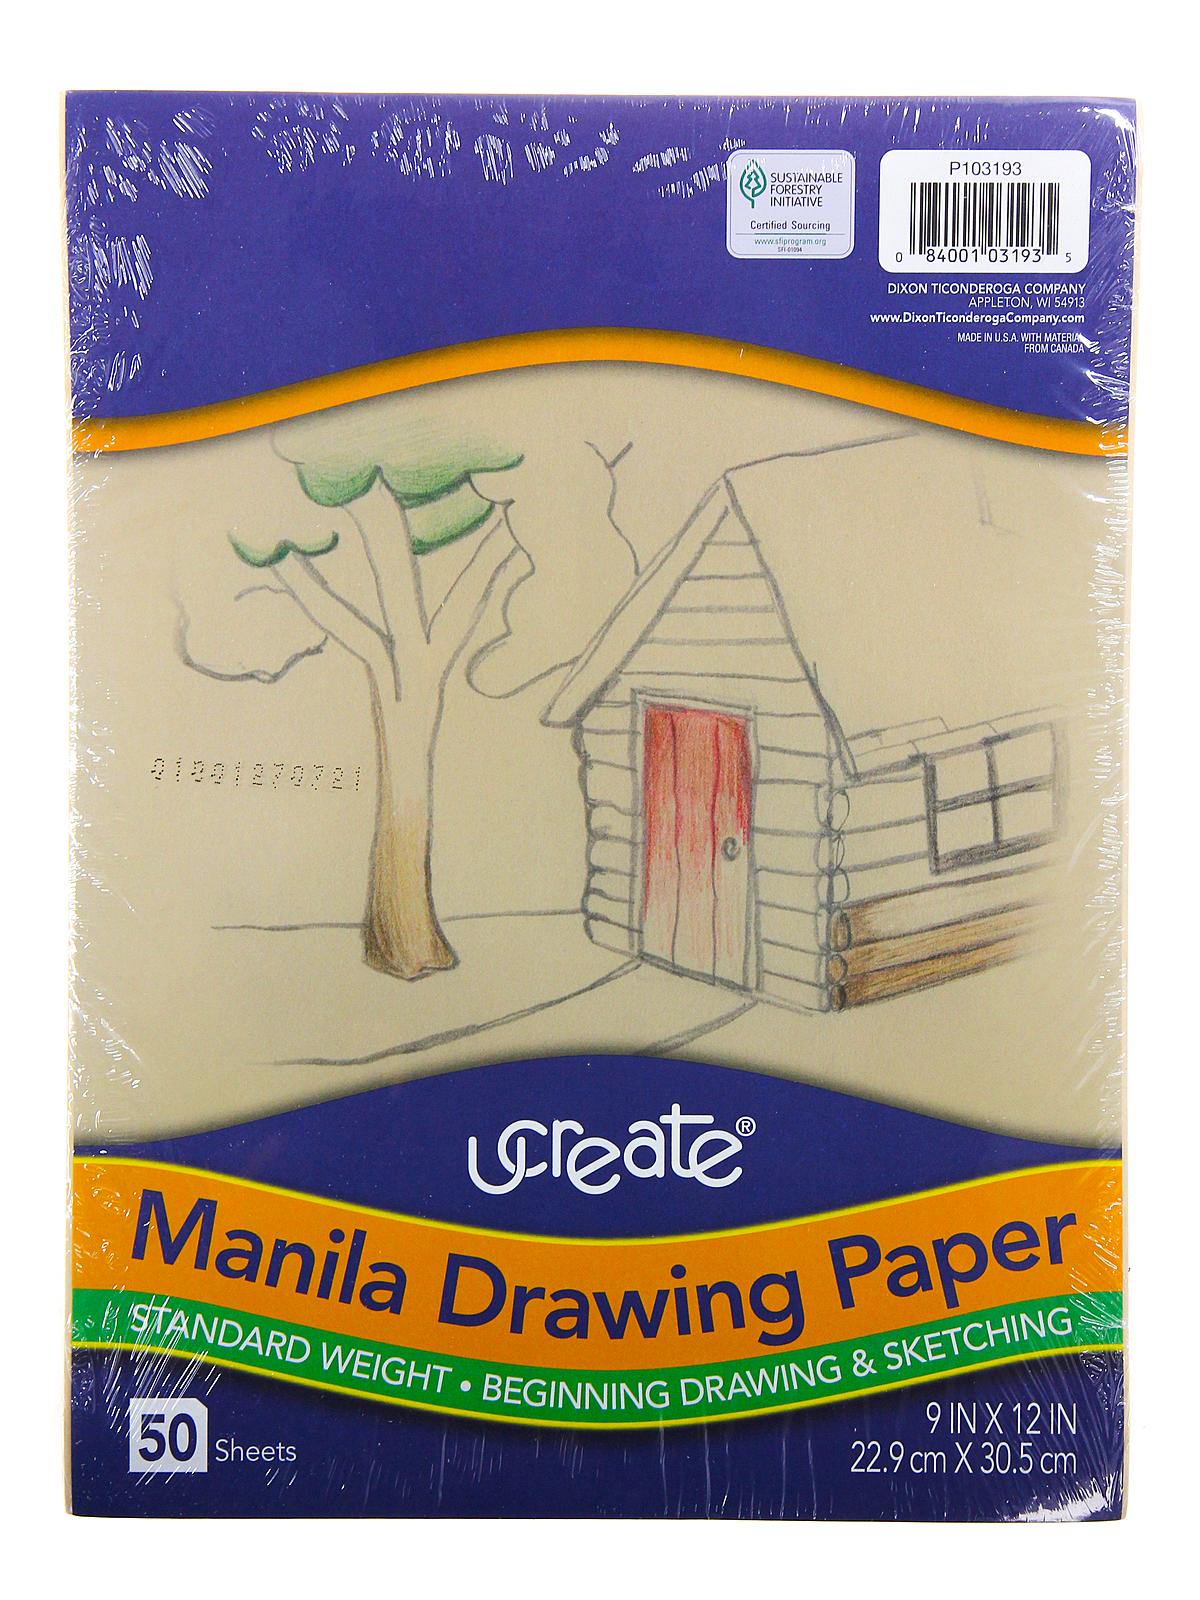 Art1st Manila Drawing Paper 9 In. X 12 In. Pack Of 50